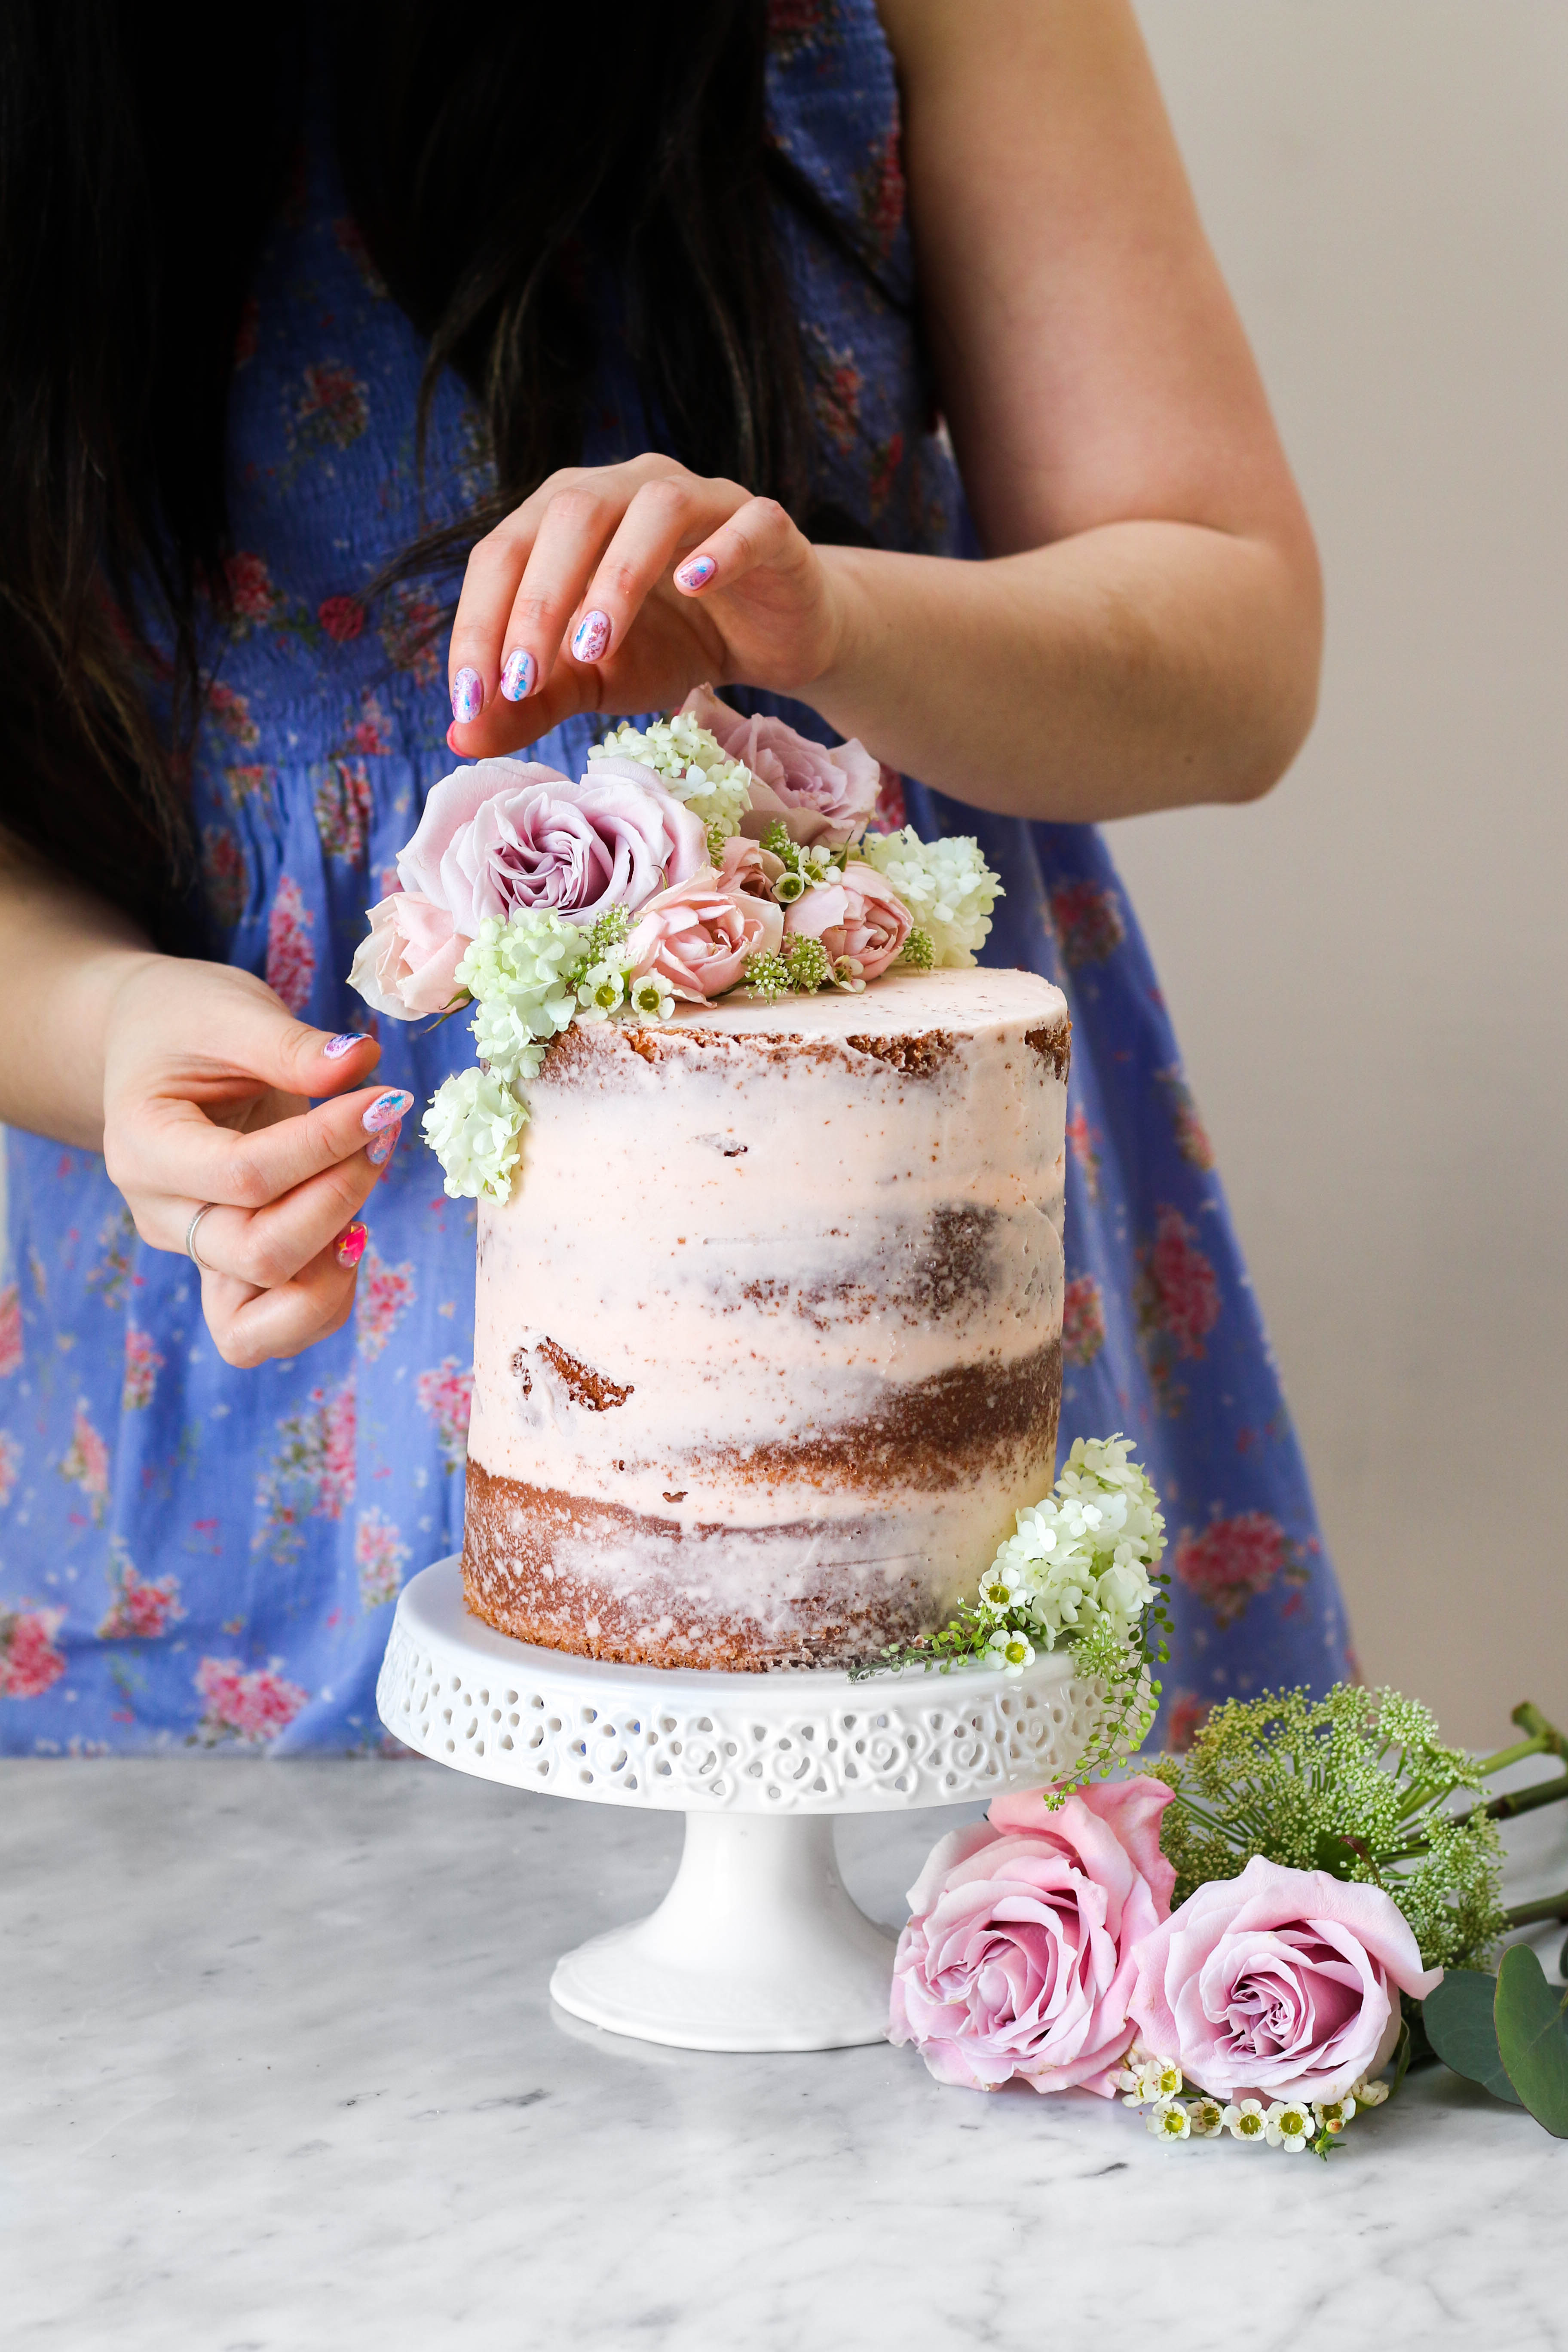 Cakes & Desserts Photos - 5-Tier Naked Cake with Fresh 